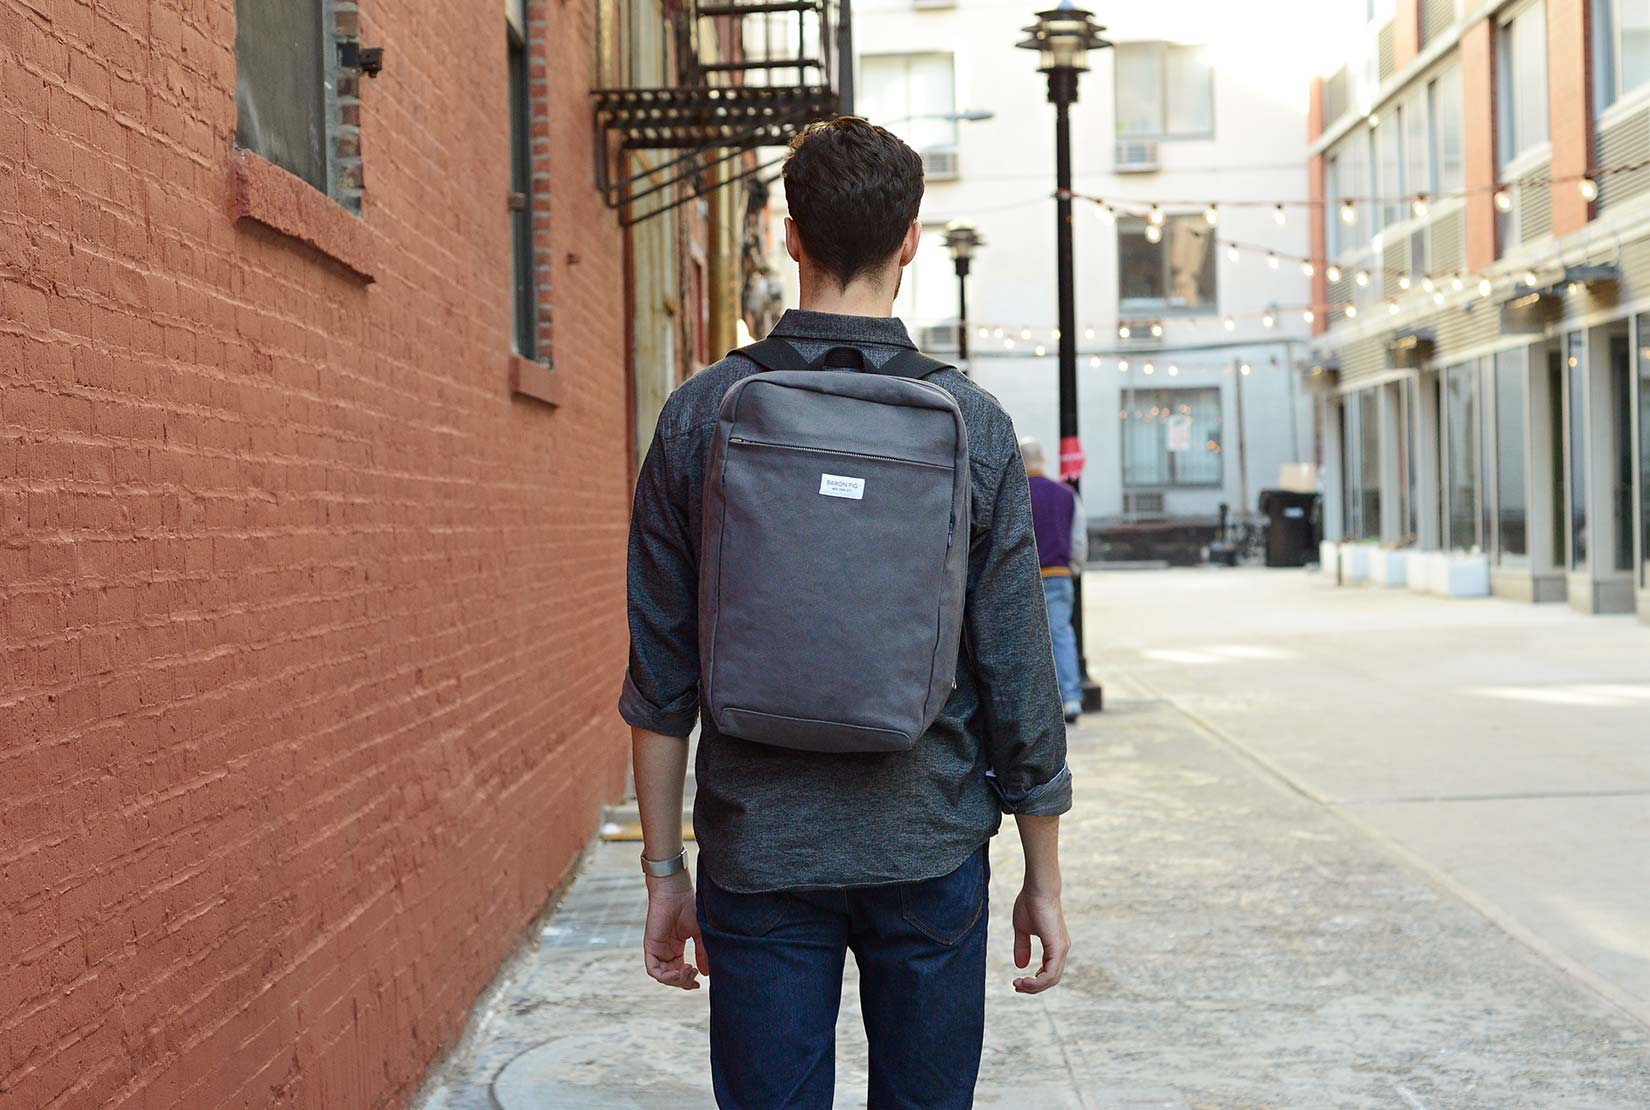 Slim, yes, but this bag can haul your daily carry.